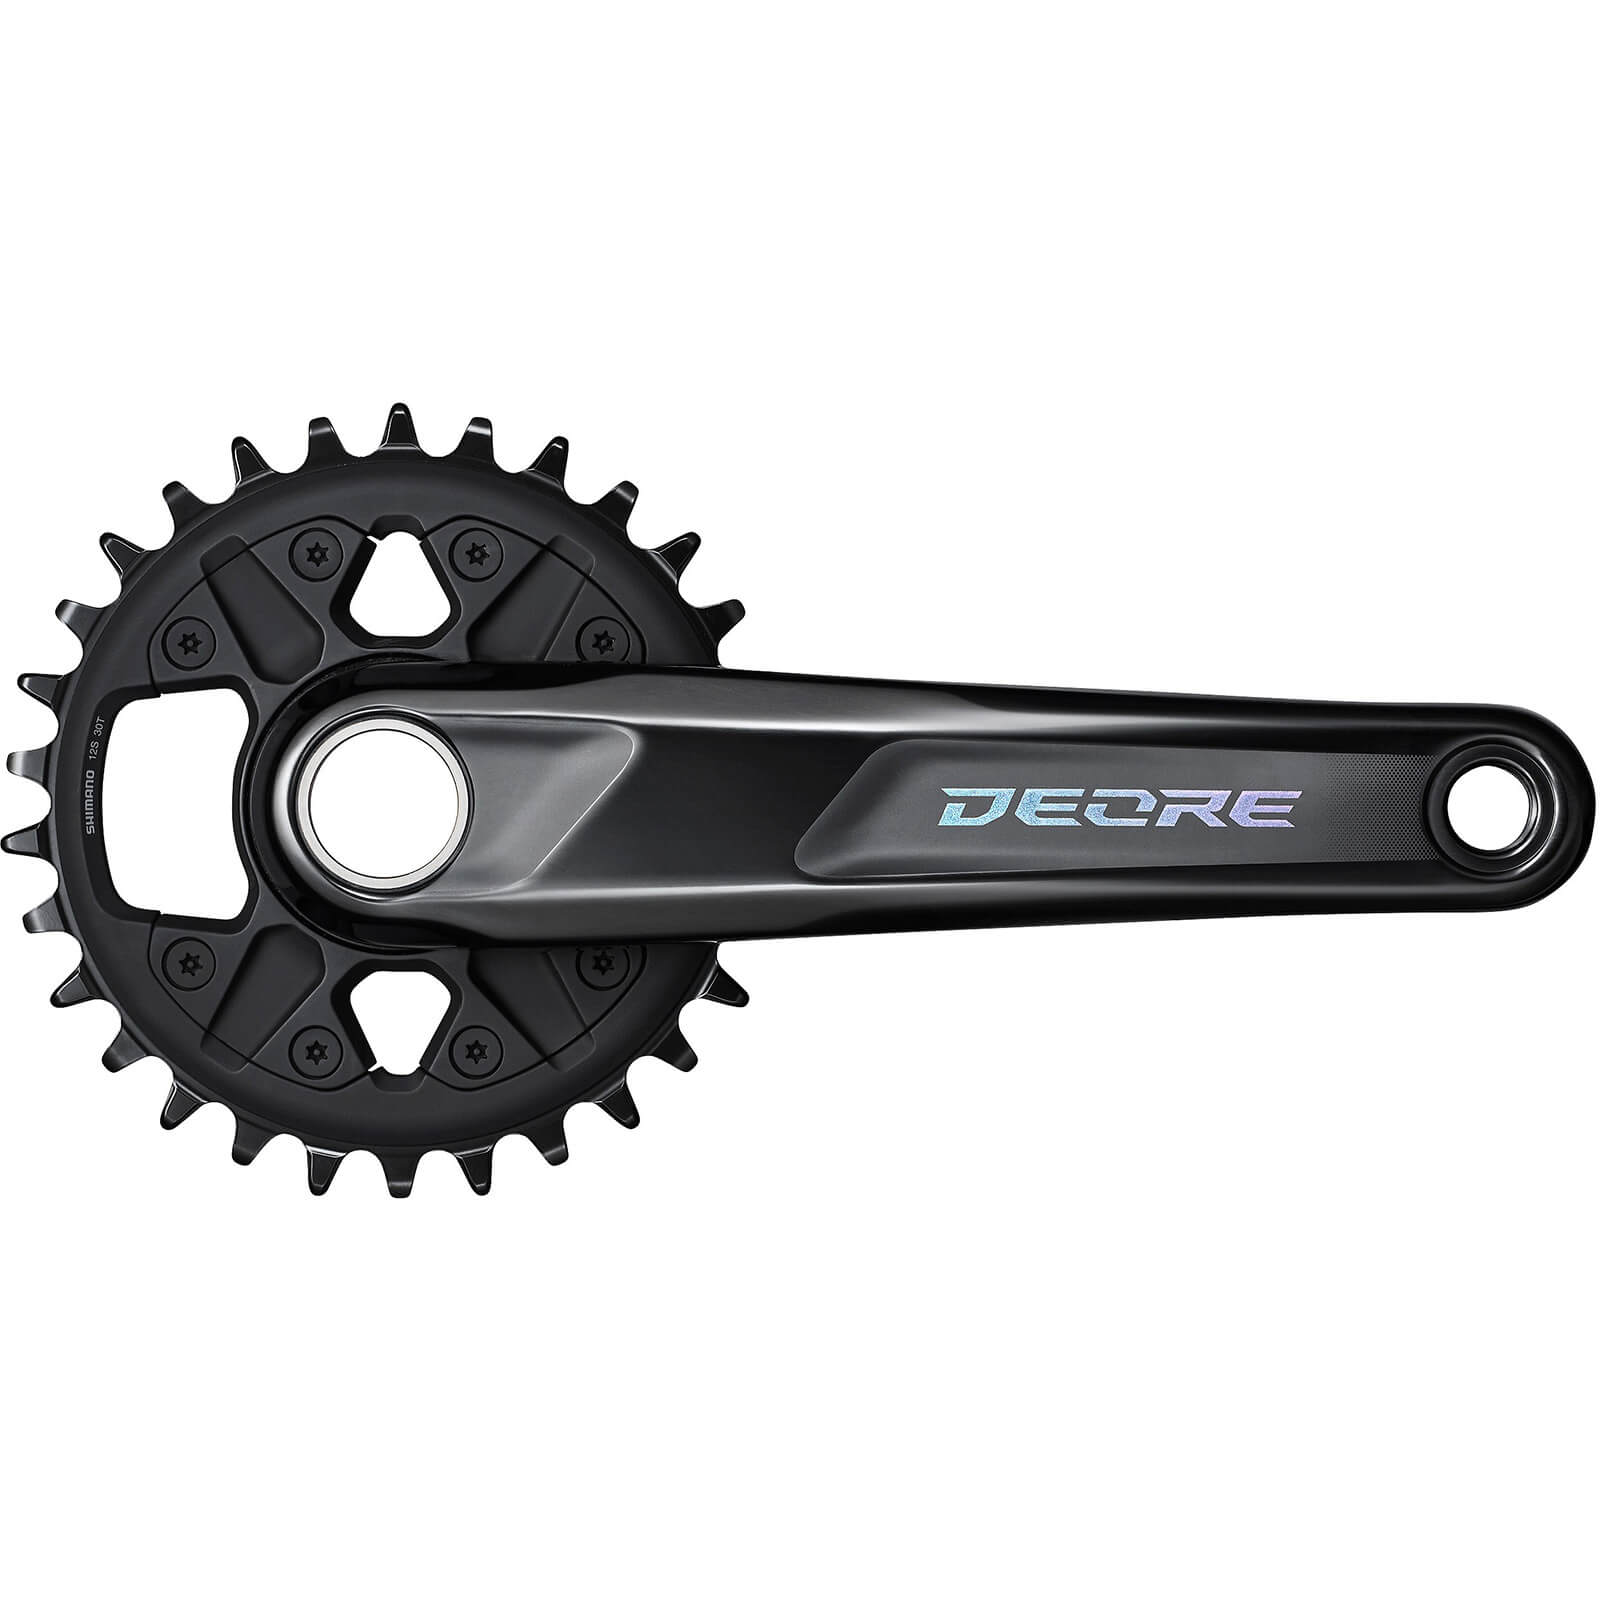 Shimano Deore M6120 Chainset - 30T - 170mm